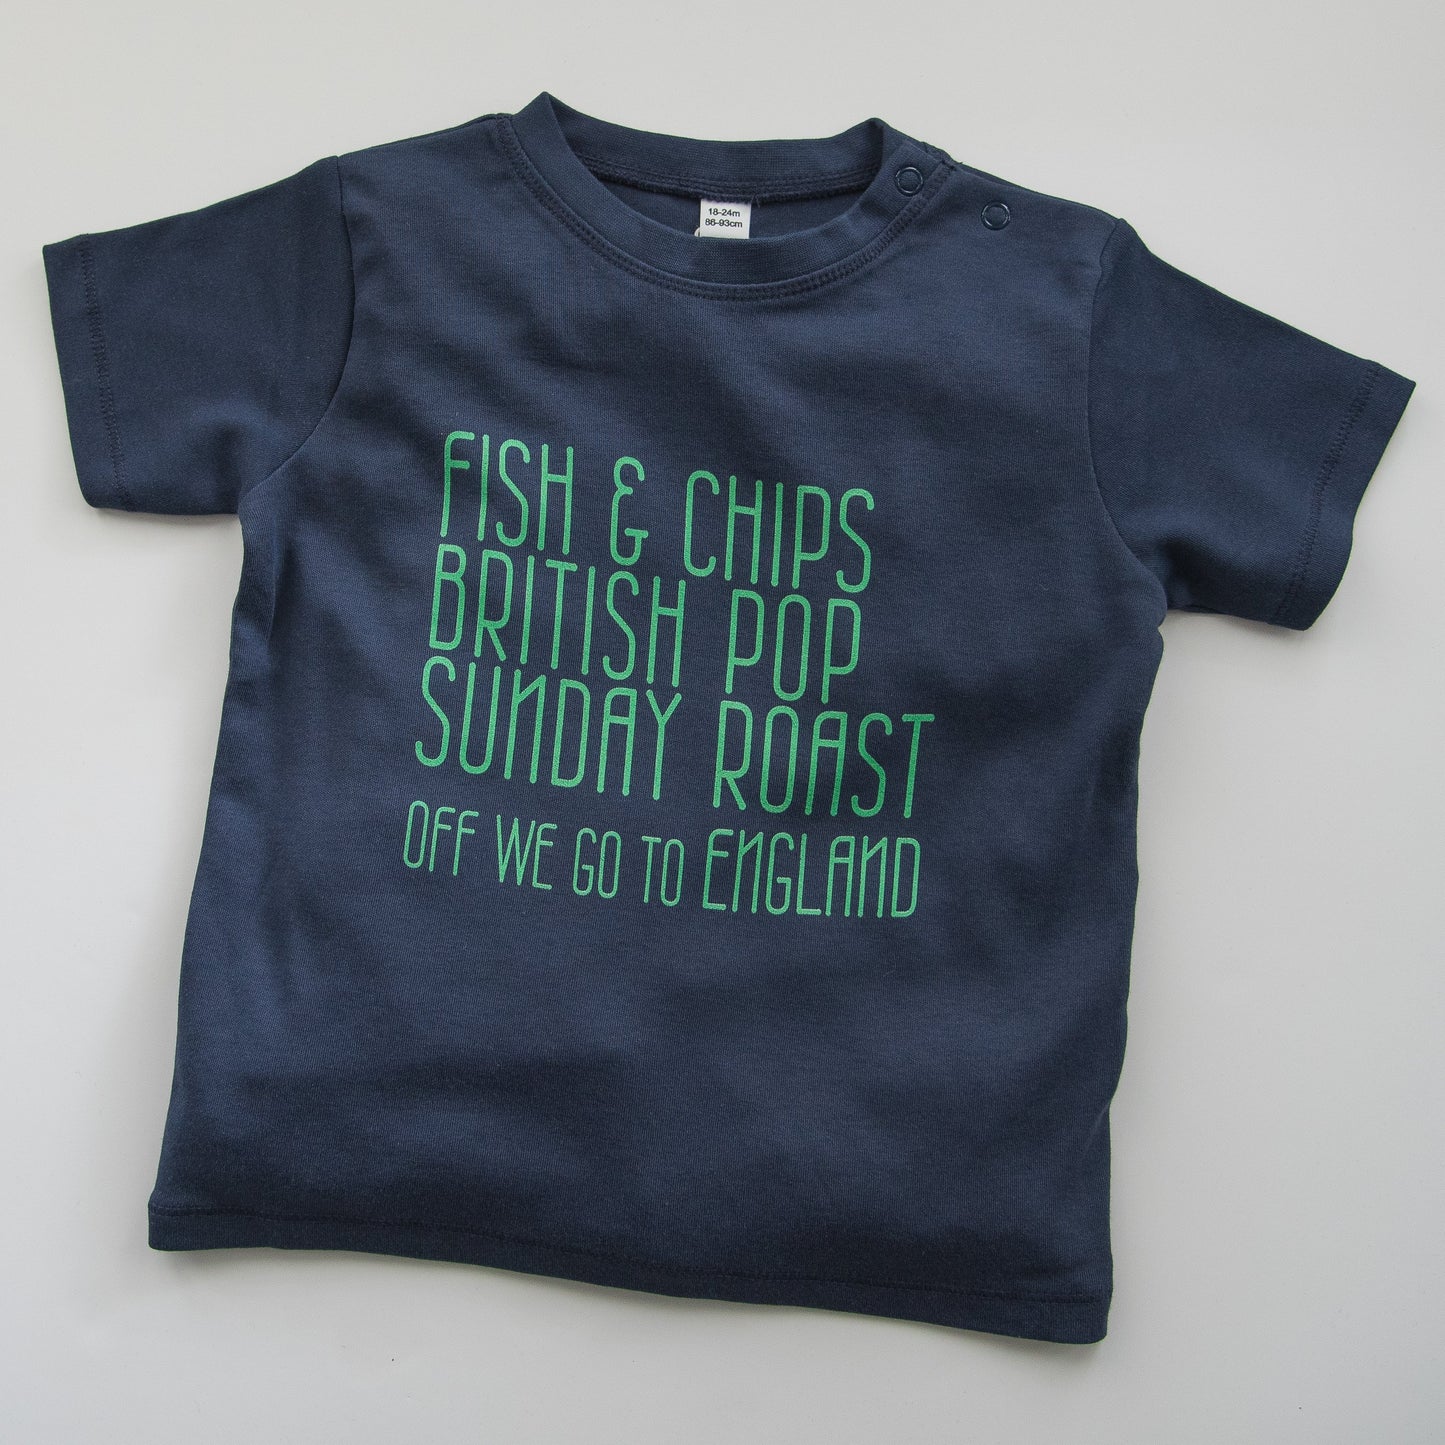 OFF WE GO TO ENGLAND - Short Sleeve Baby Tee - Little Mate Adventures 